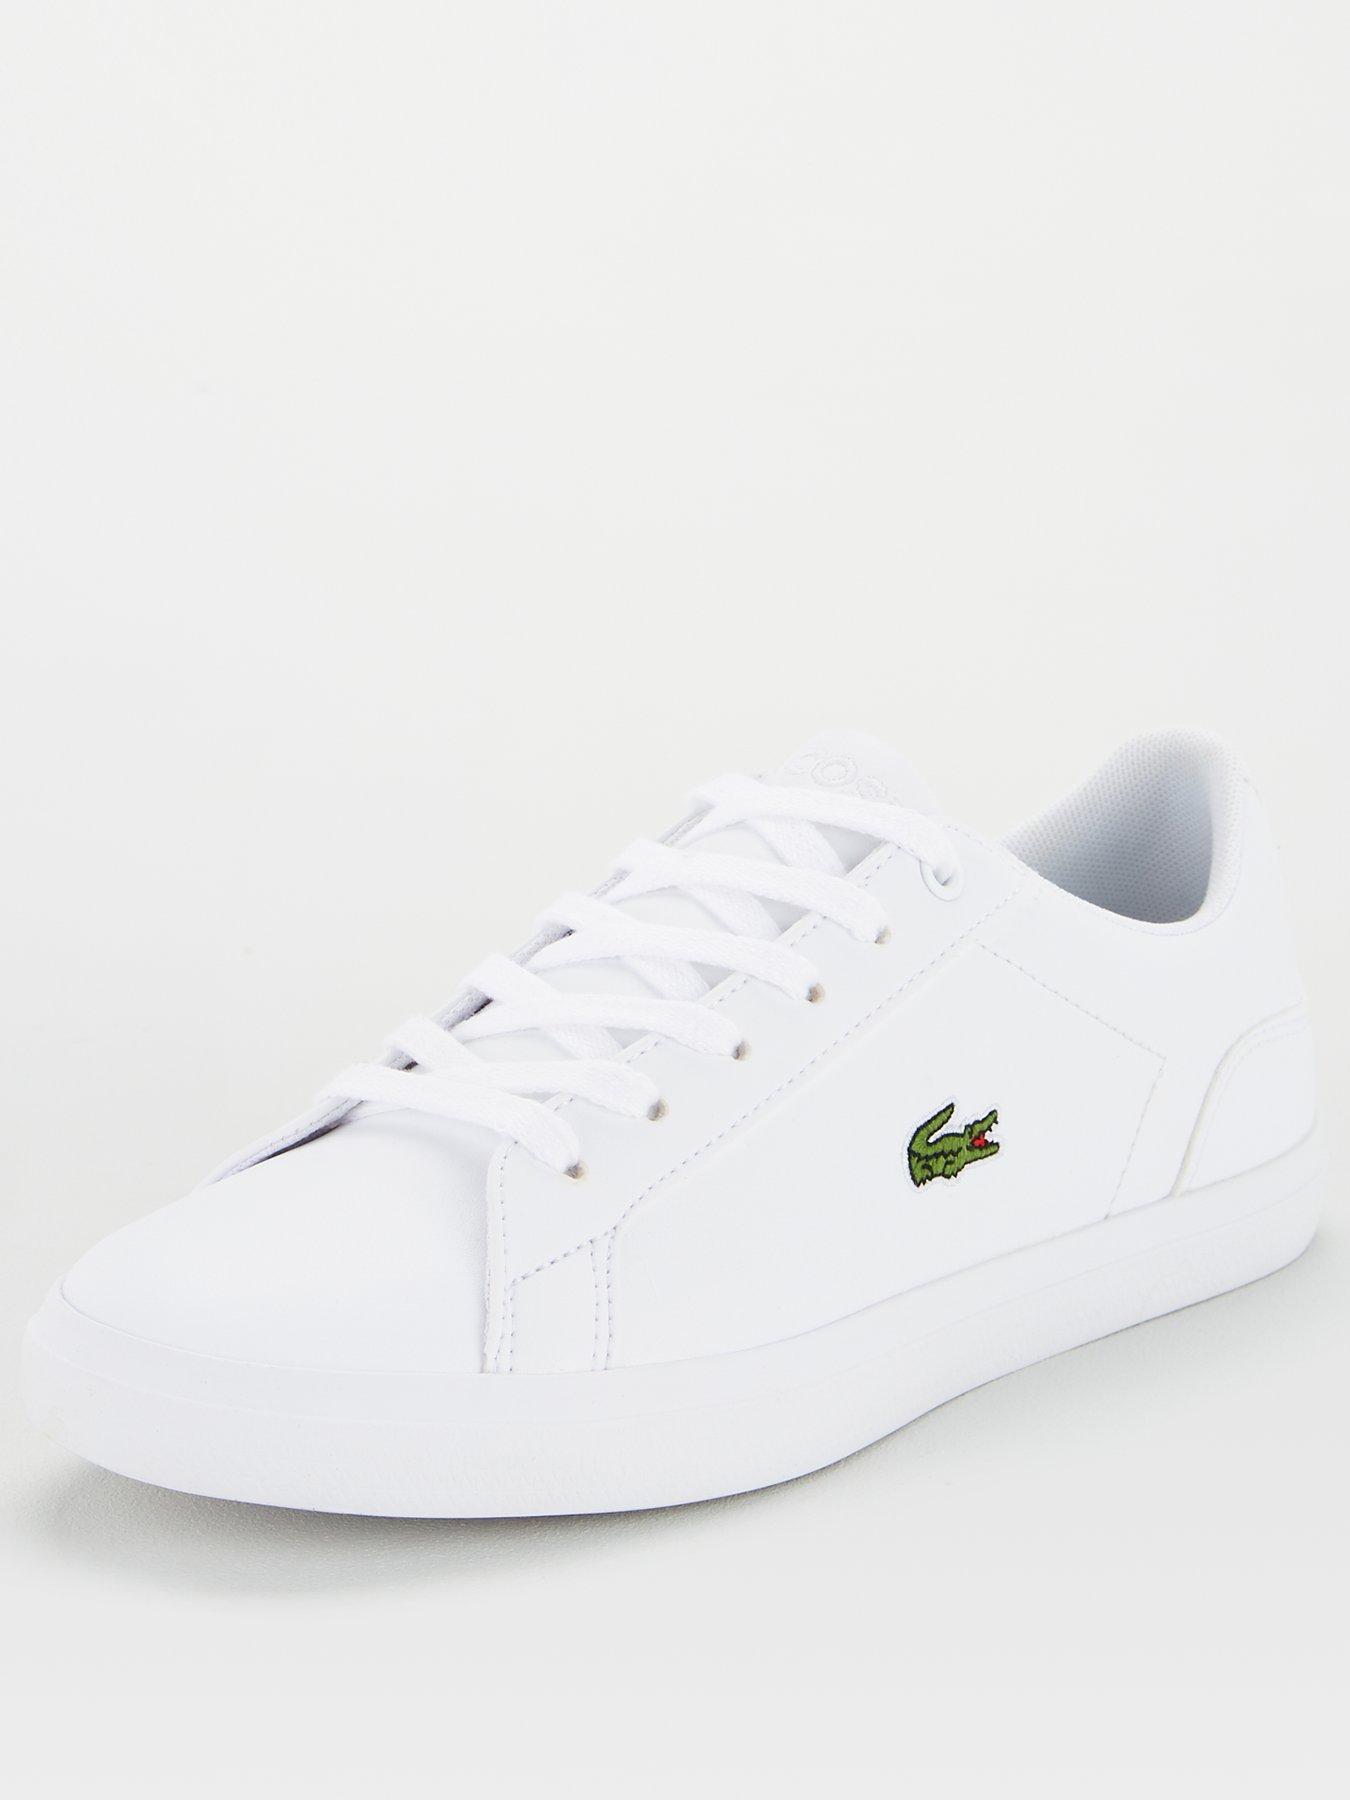 Lacoste Straightset 119 1 White//Navy Synthetic Baby Trainers Shoes